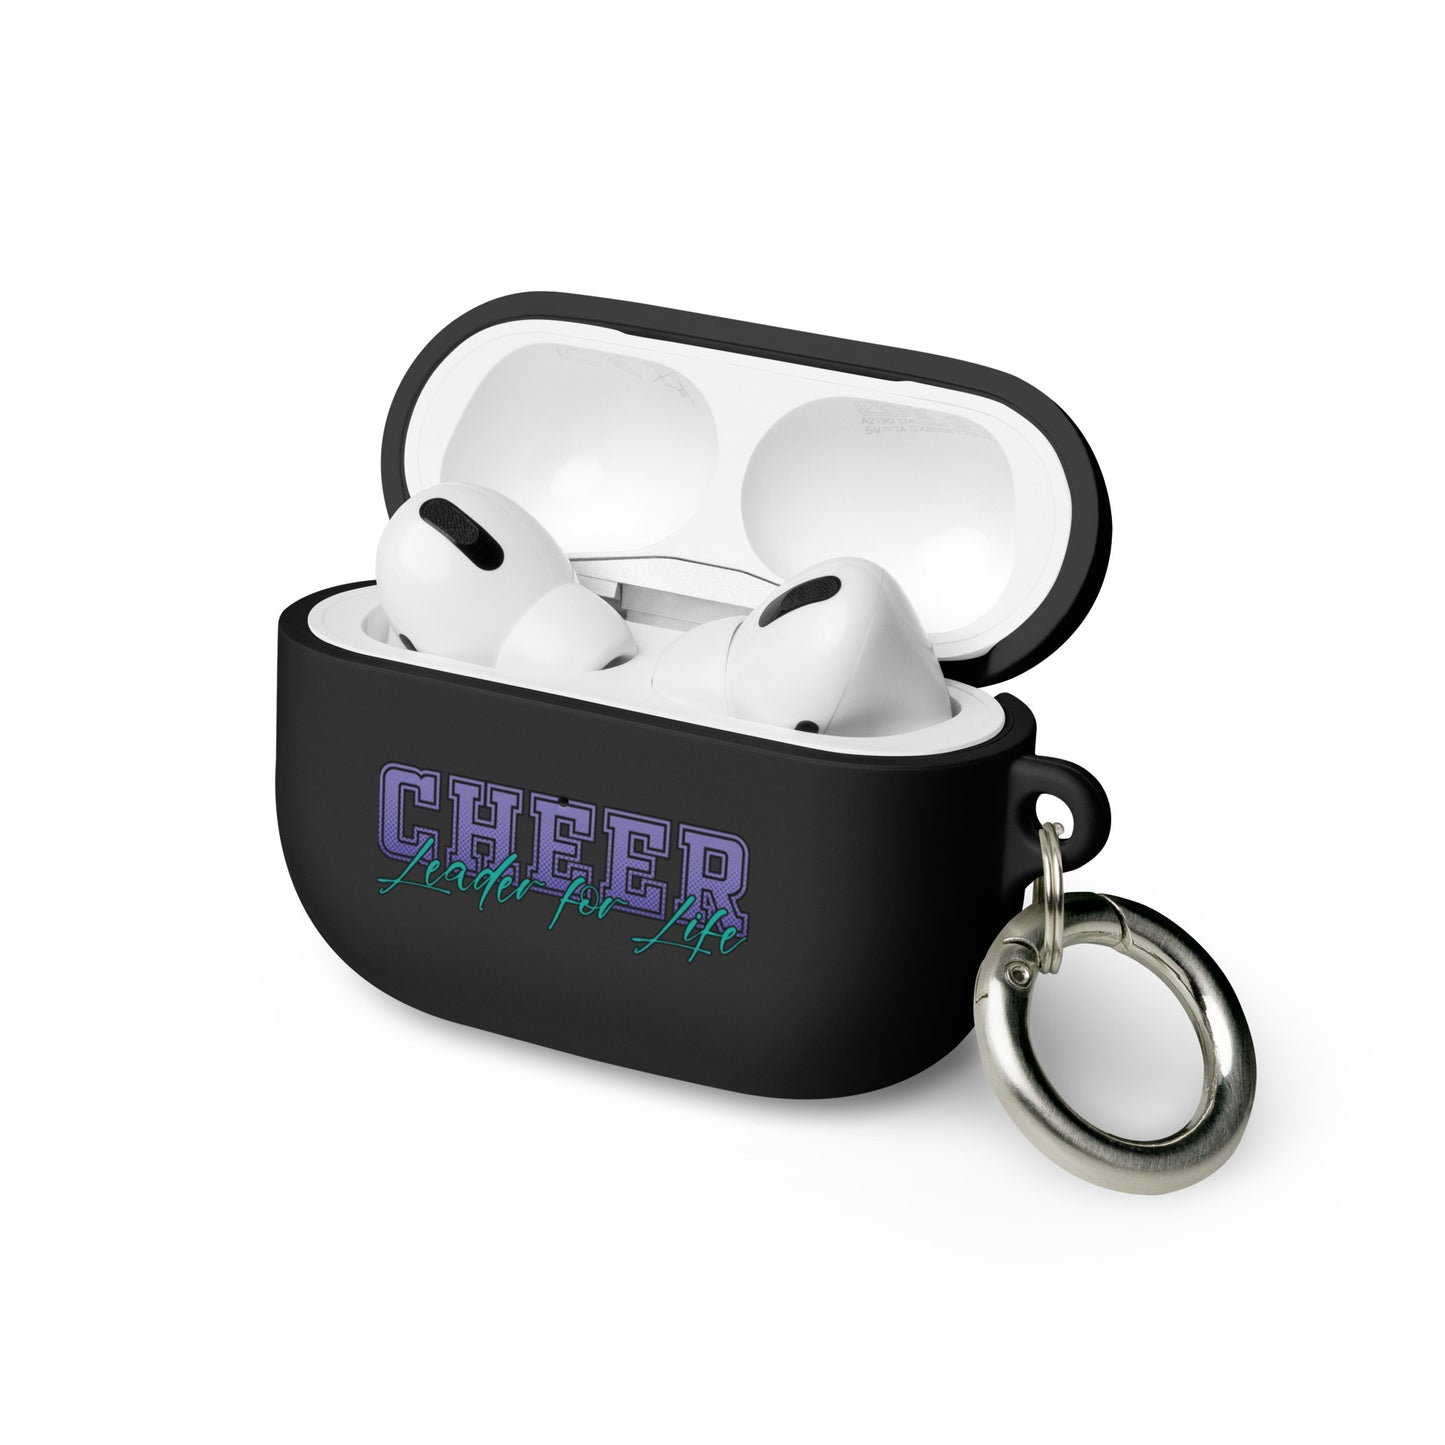 CHEER Leader for Life: AirPods case or AirPods Pro case